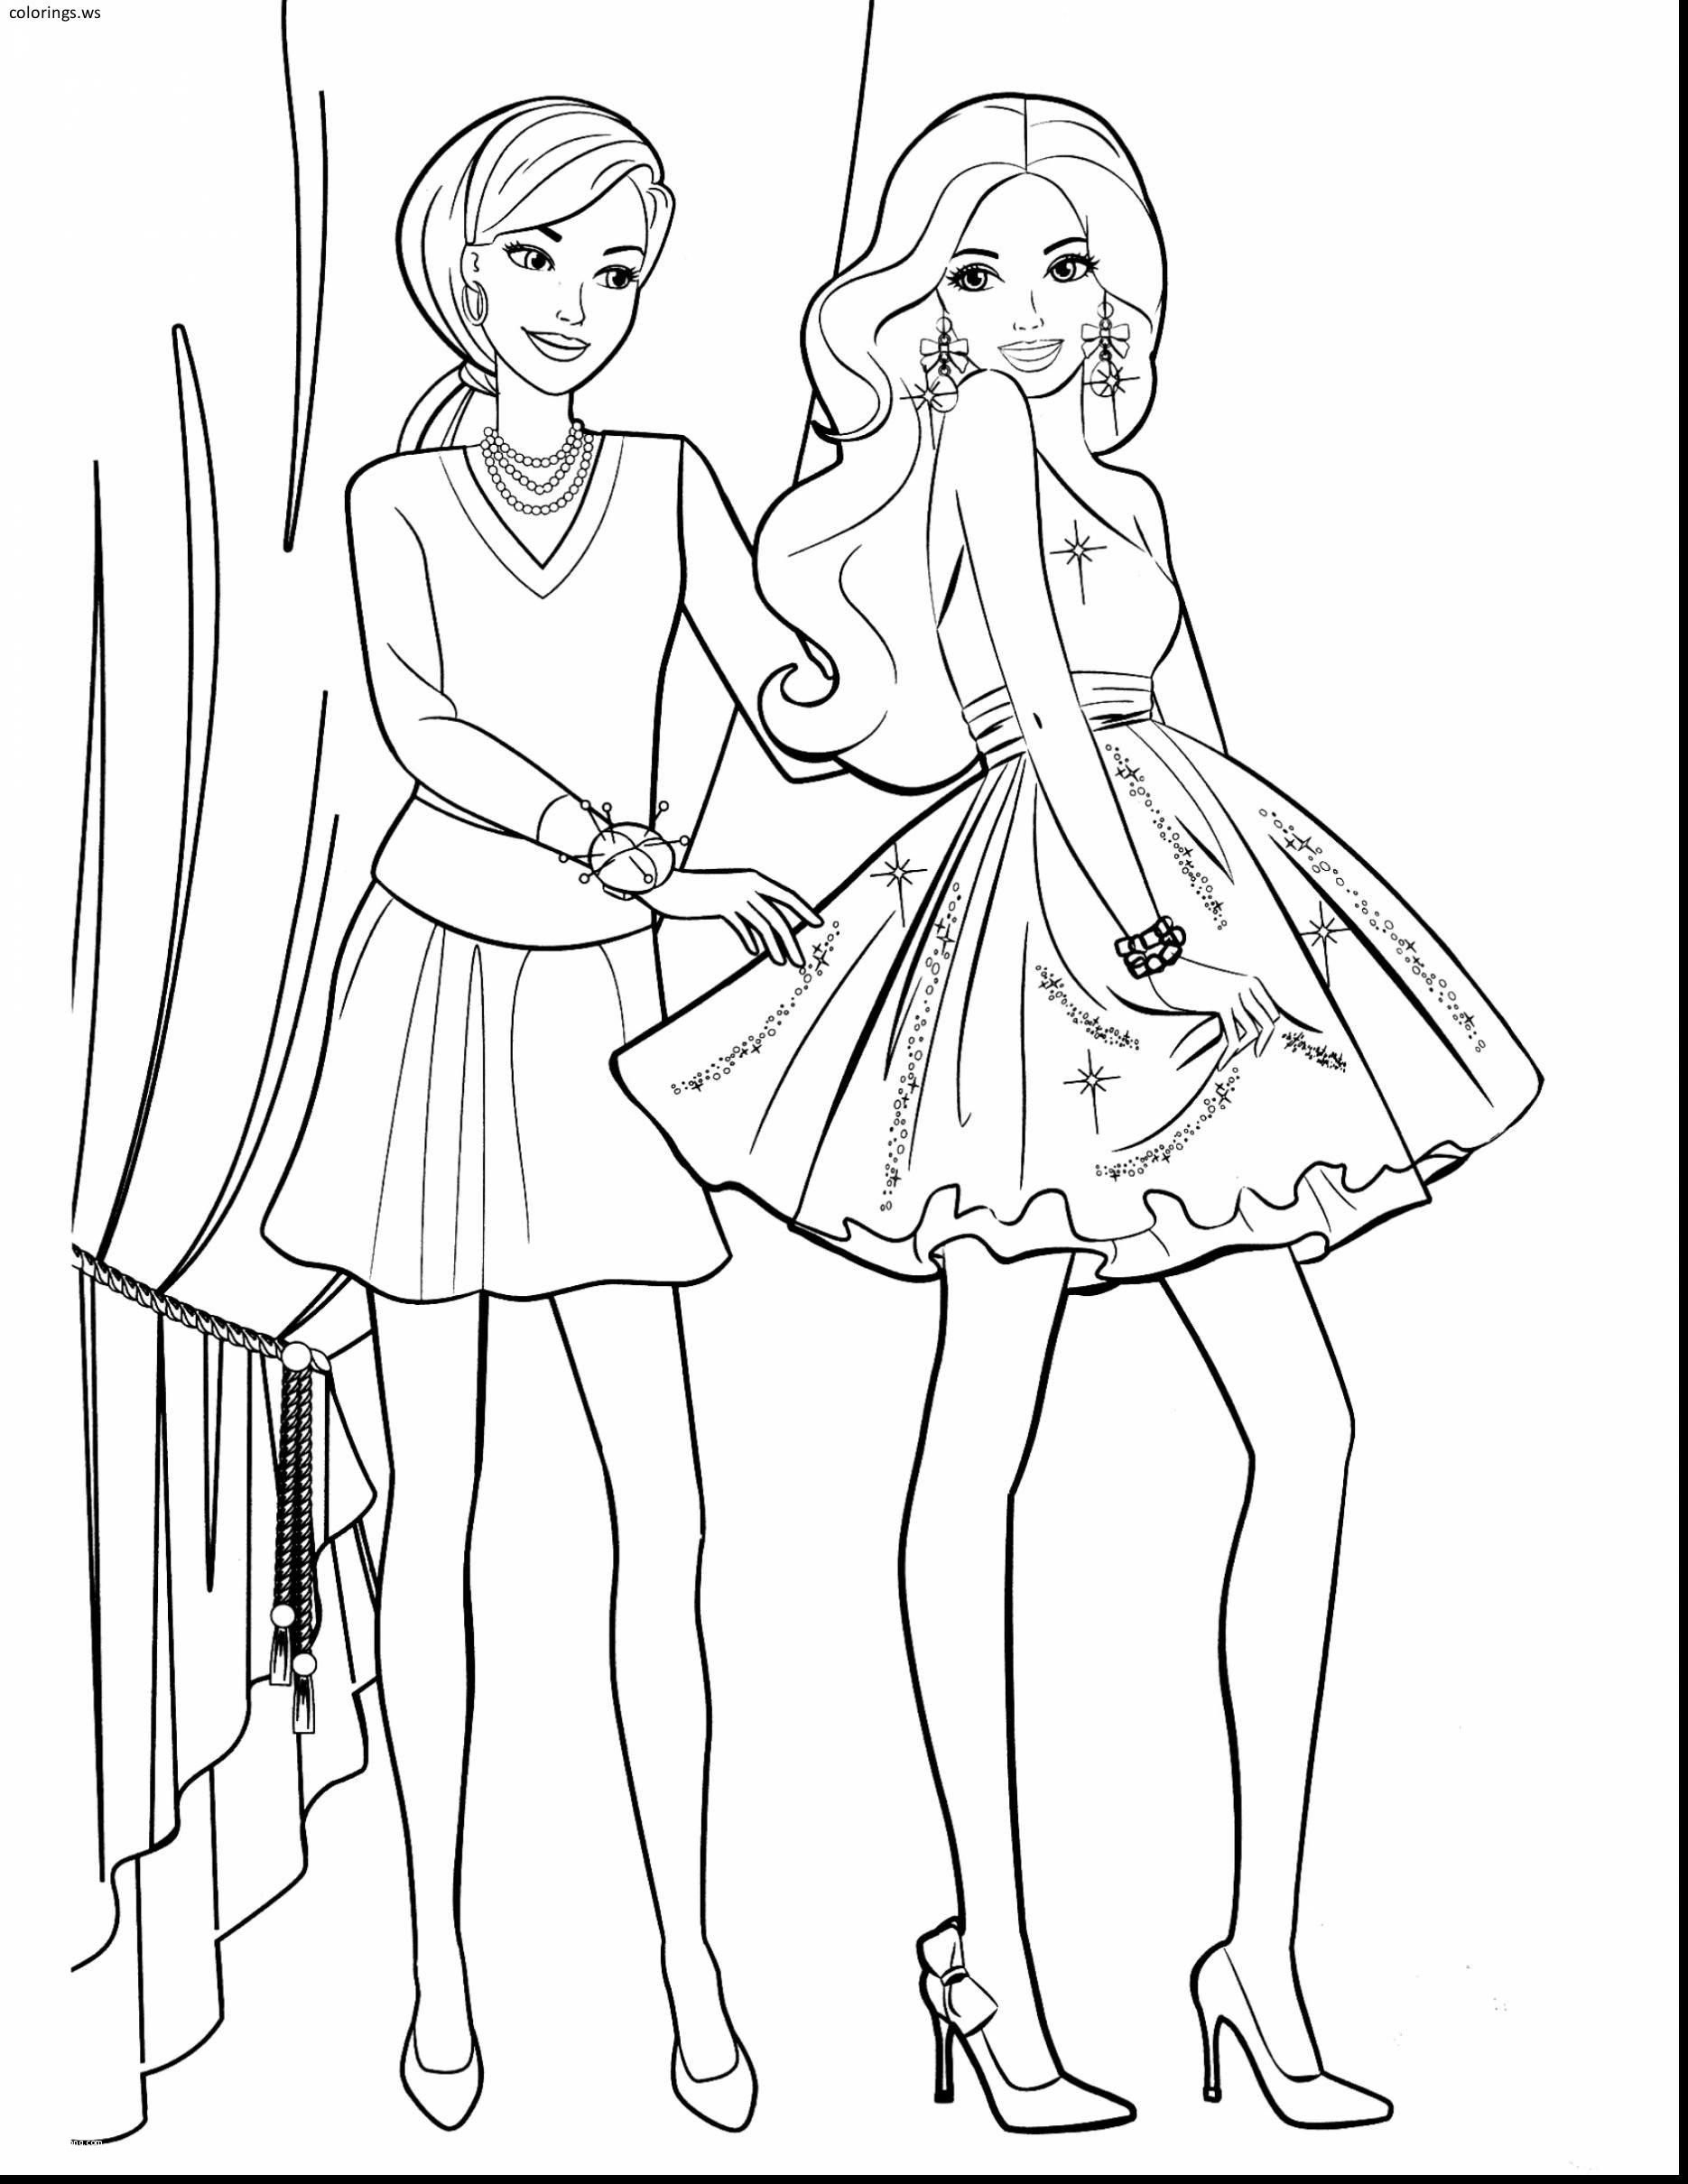 coloring pages : Coloring Pages To Color Online For Free Luxury Coloring  Pages Barbie Coloring Pages to Color Online for Free ~  affiliateprogrambook.com